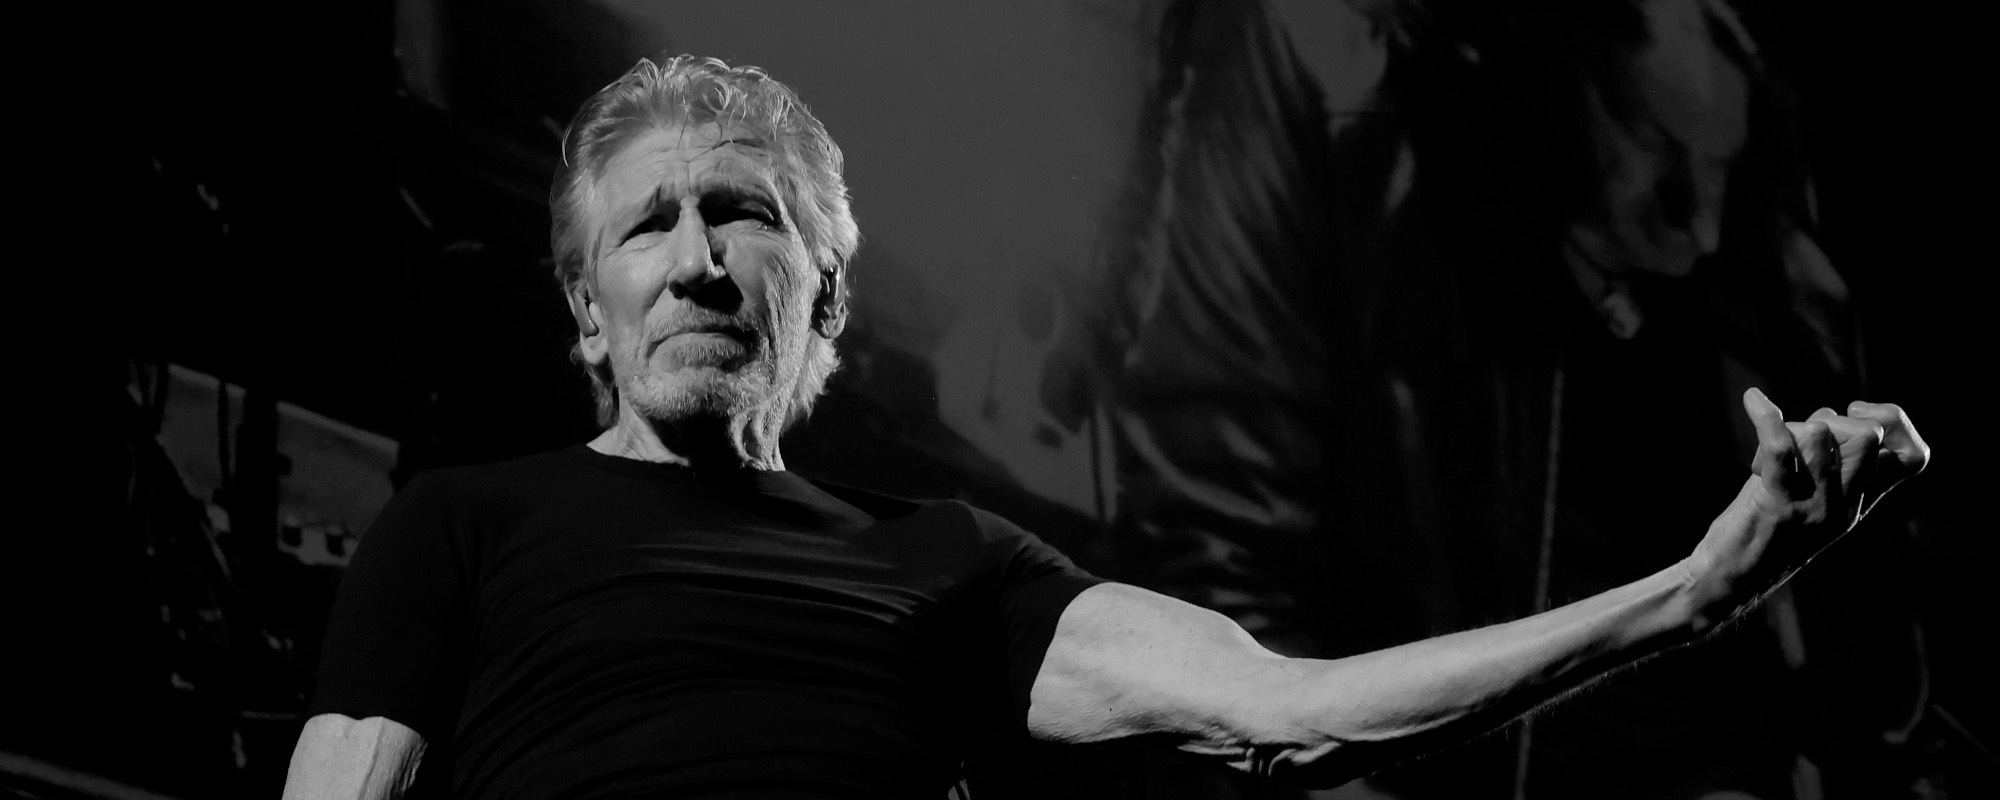 Roger Waters Shares the Meaning Behind “Breathe” Following ‘Dark Side of the Moon’ Redux